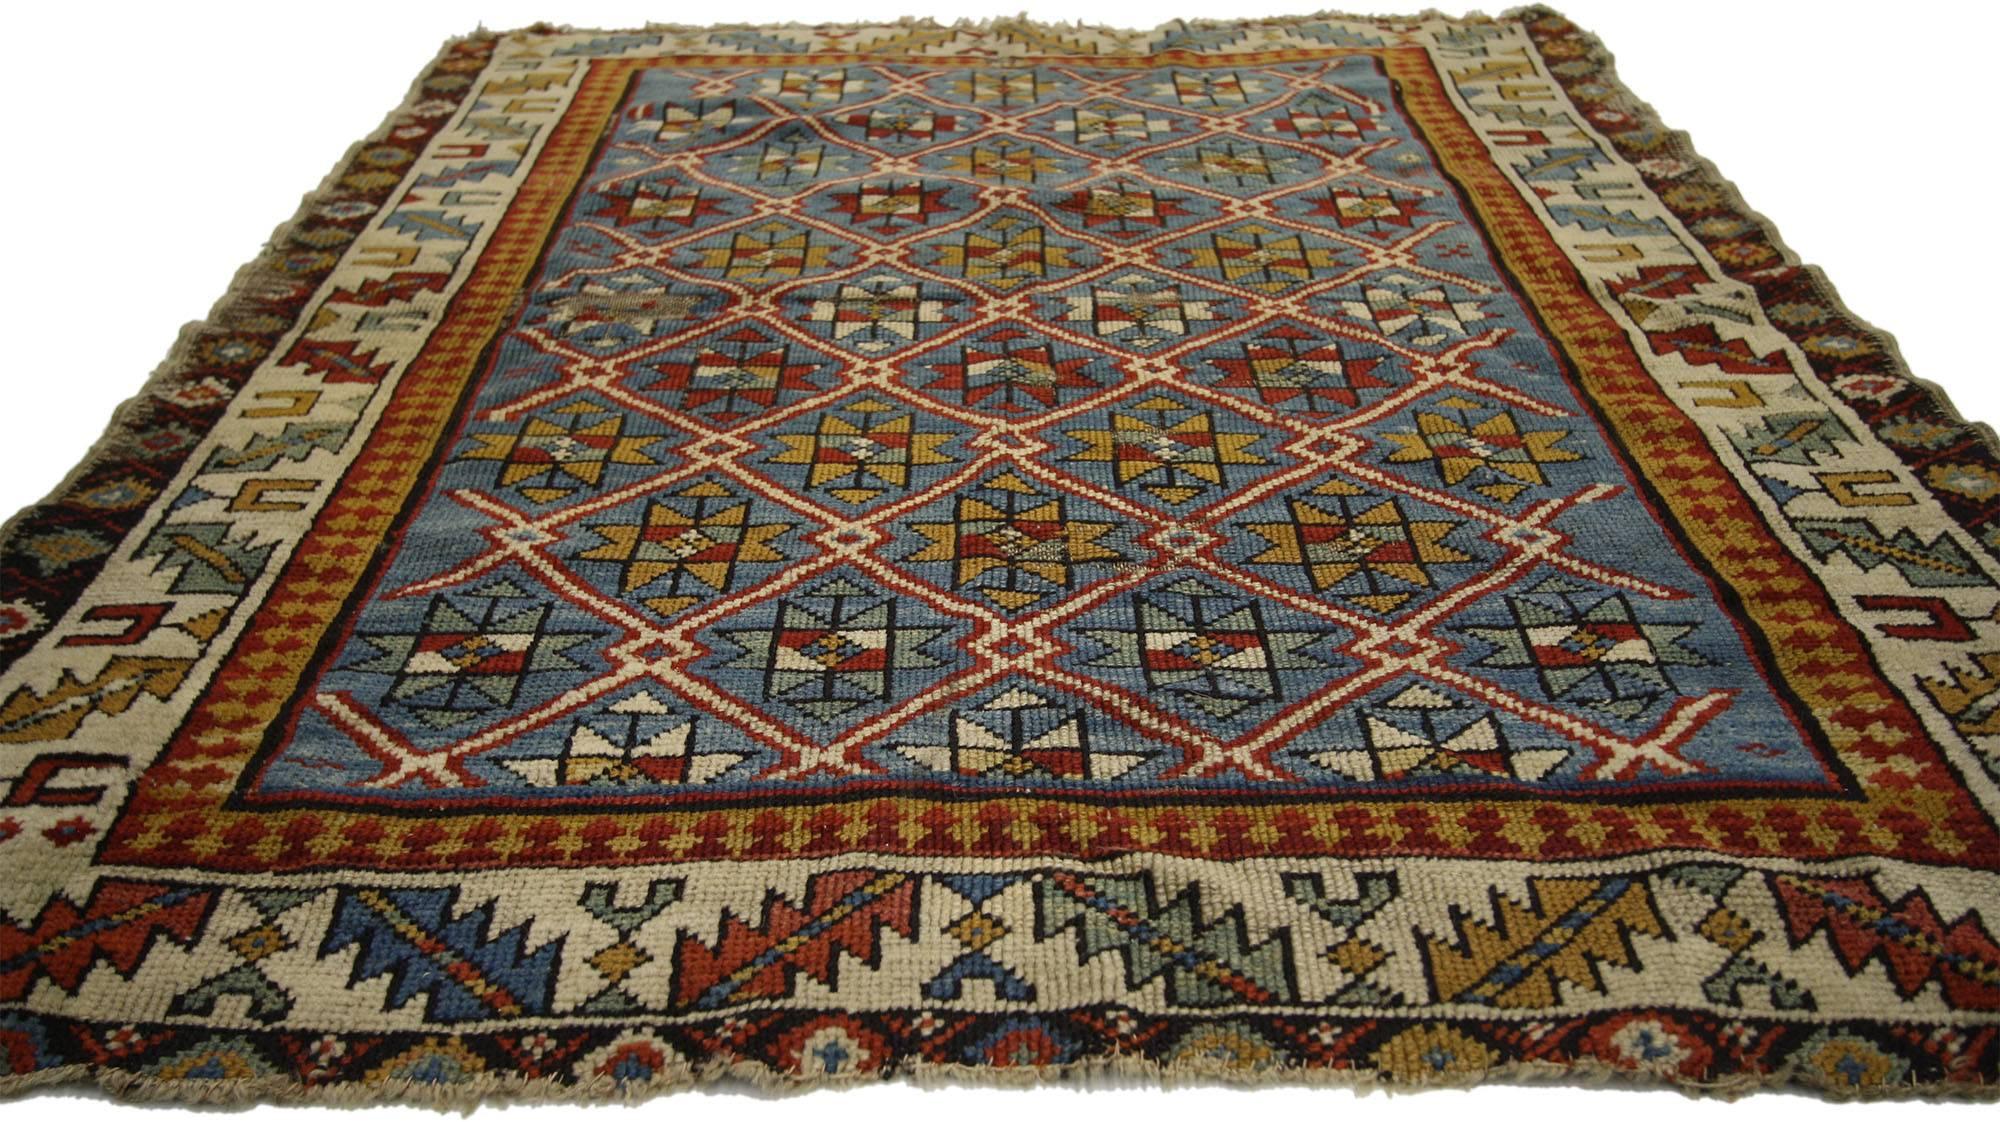 77146 Antique Russian Caucasian Shirvan Rug with Diamond Lattice 03'04 x 04'00. With its perfectly worn-in charm, pop of color and edgy elements, this antique Caucasian Shirvan rug will create a warm, lived-in look and take on a curated look that